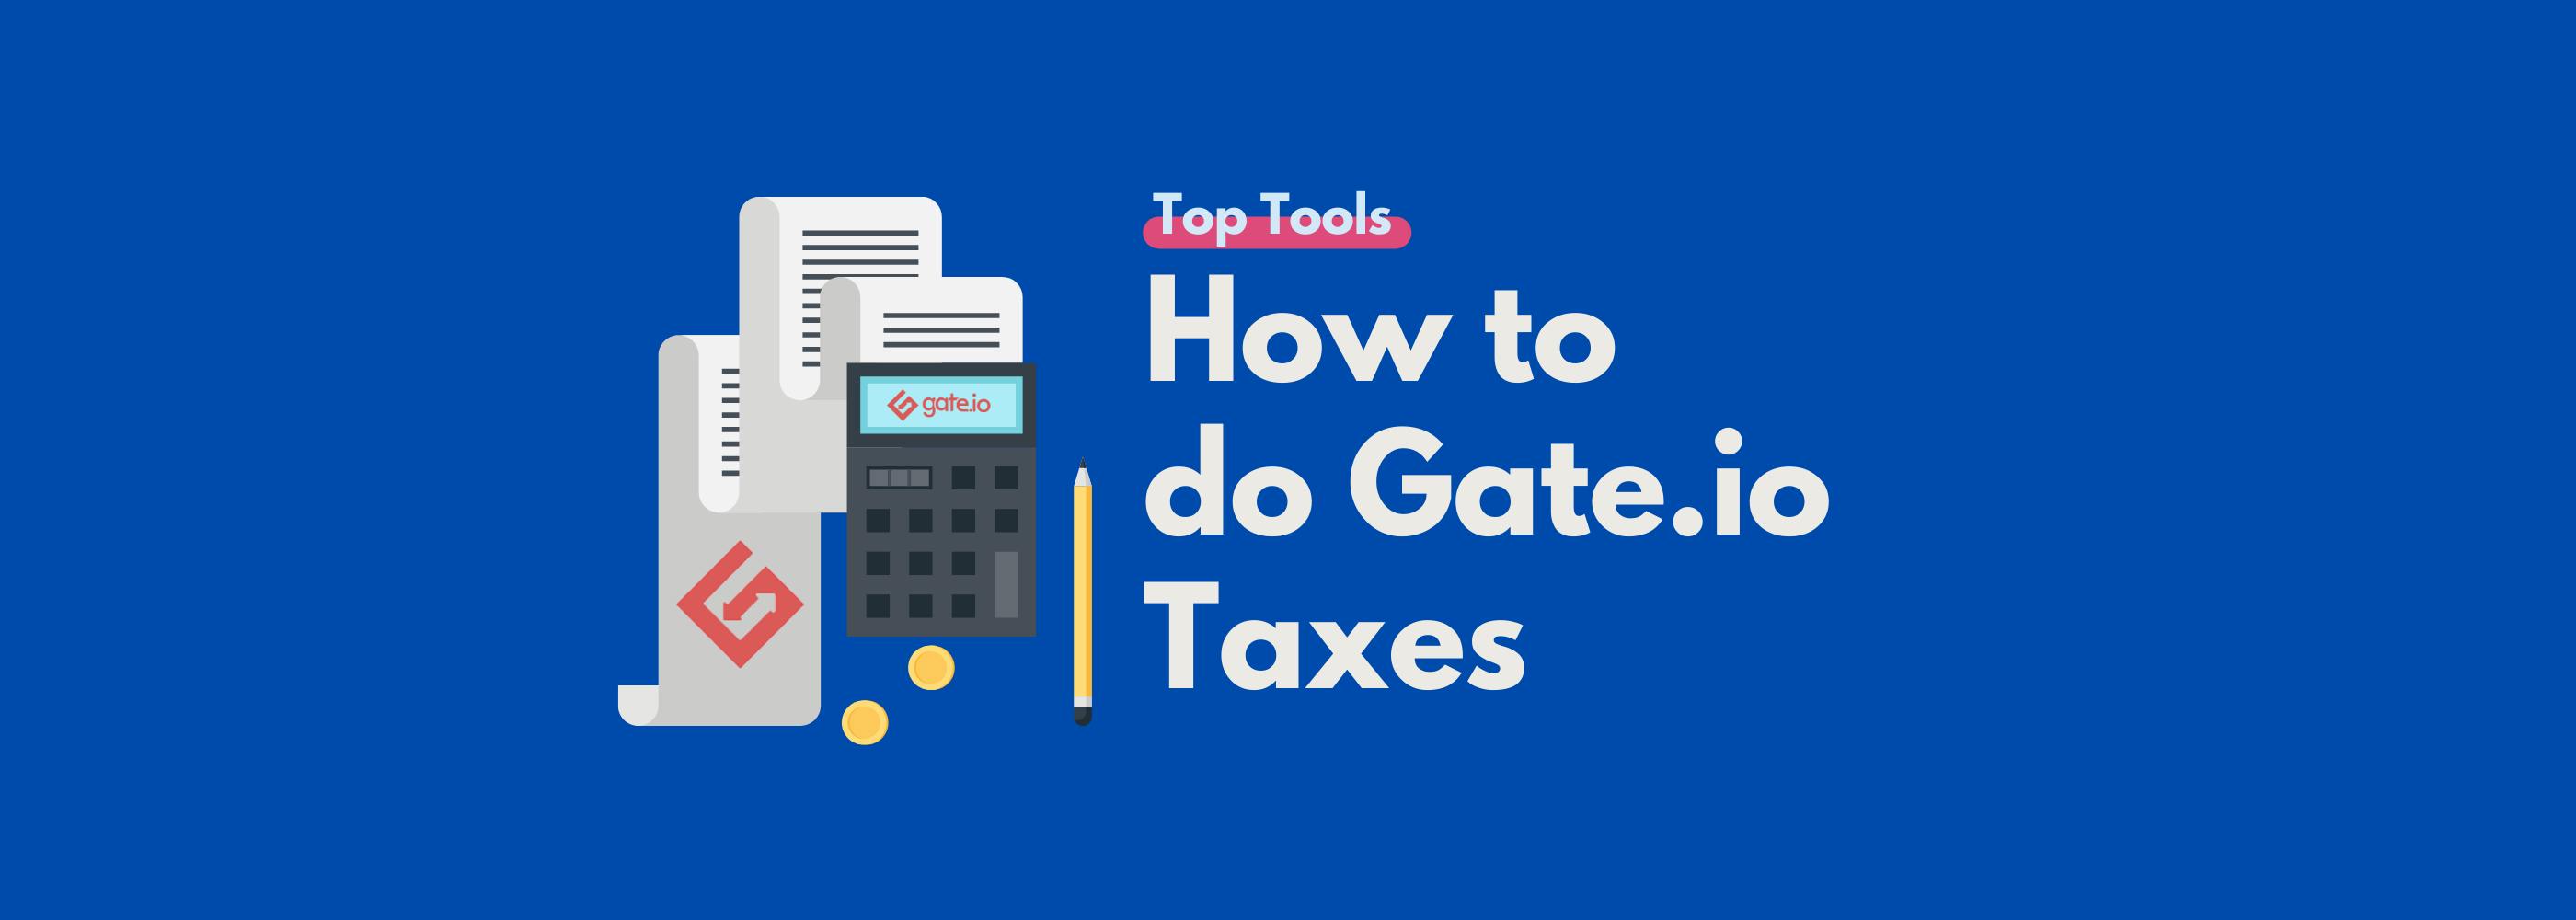 How to do your Gate.io taxes